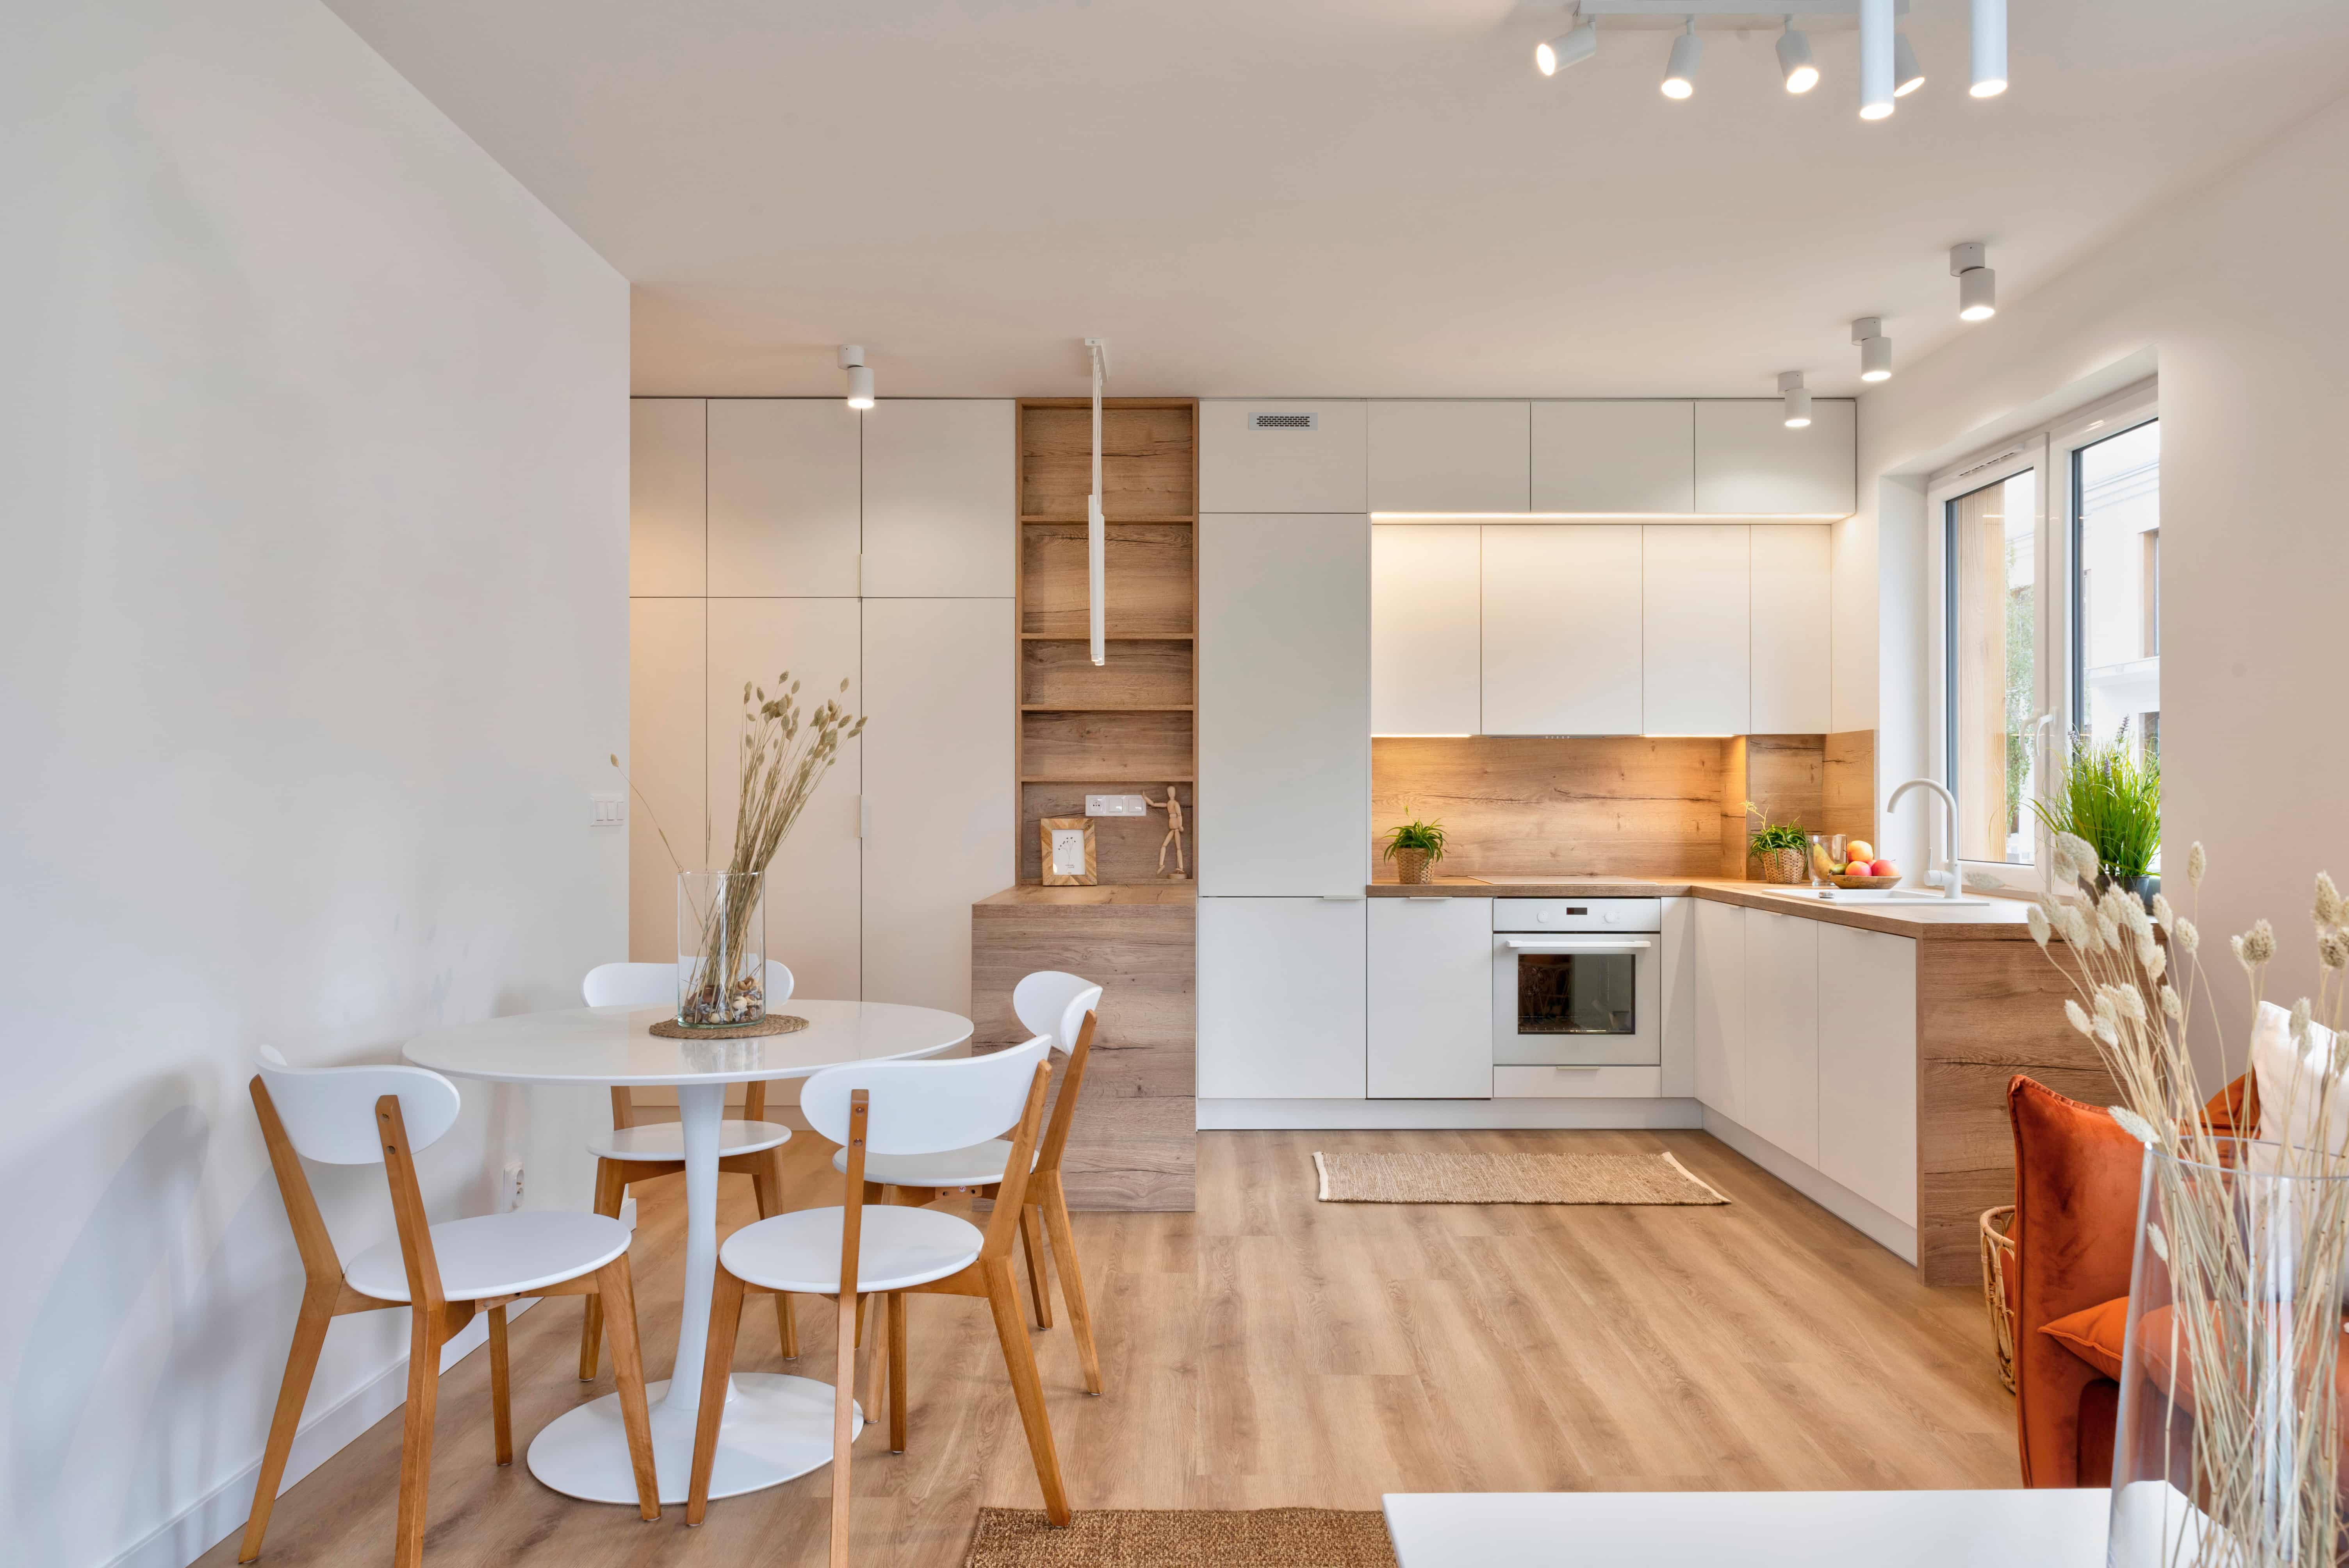 A white and wood kitchen designed by a multi-family architect